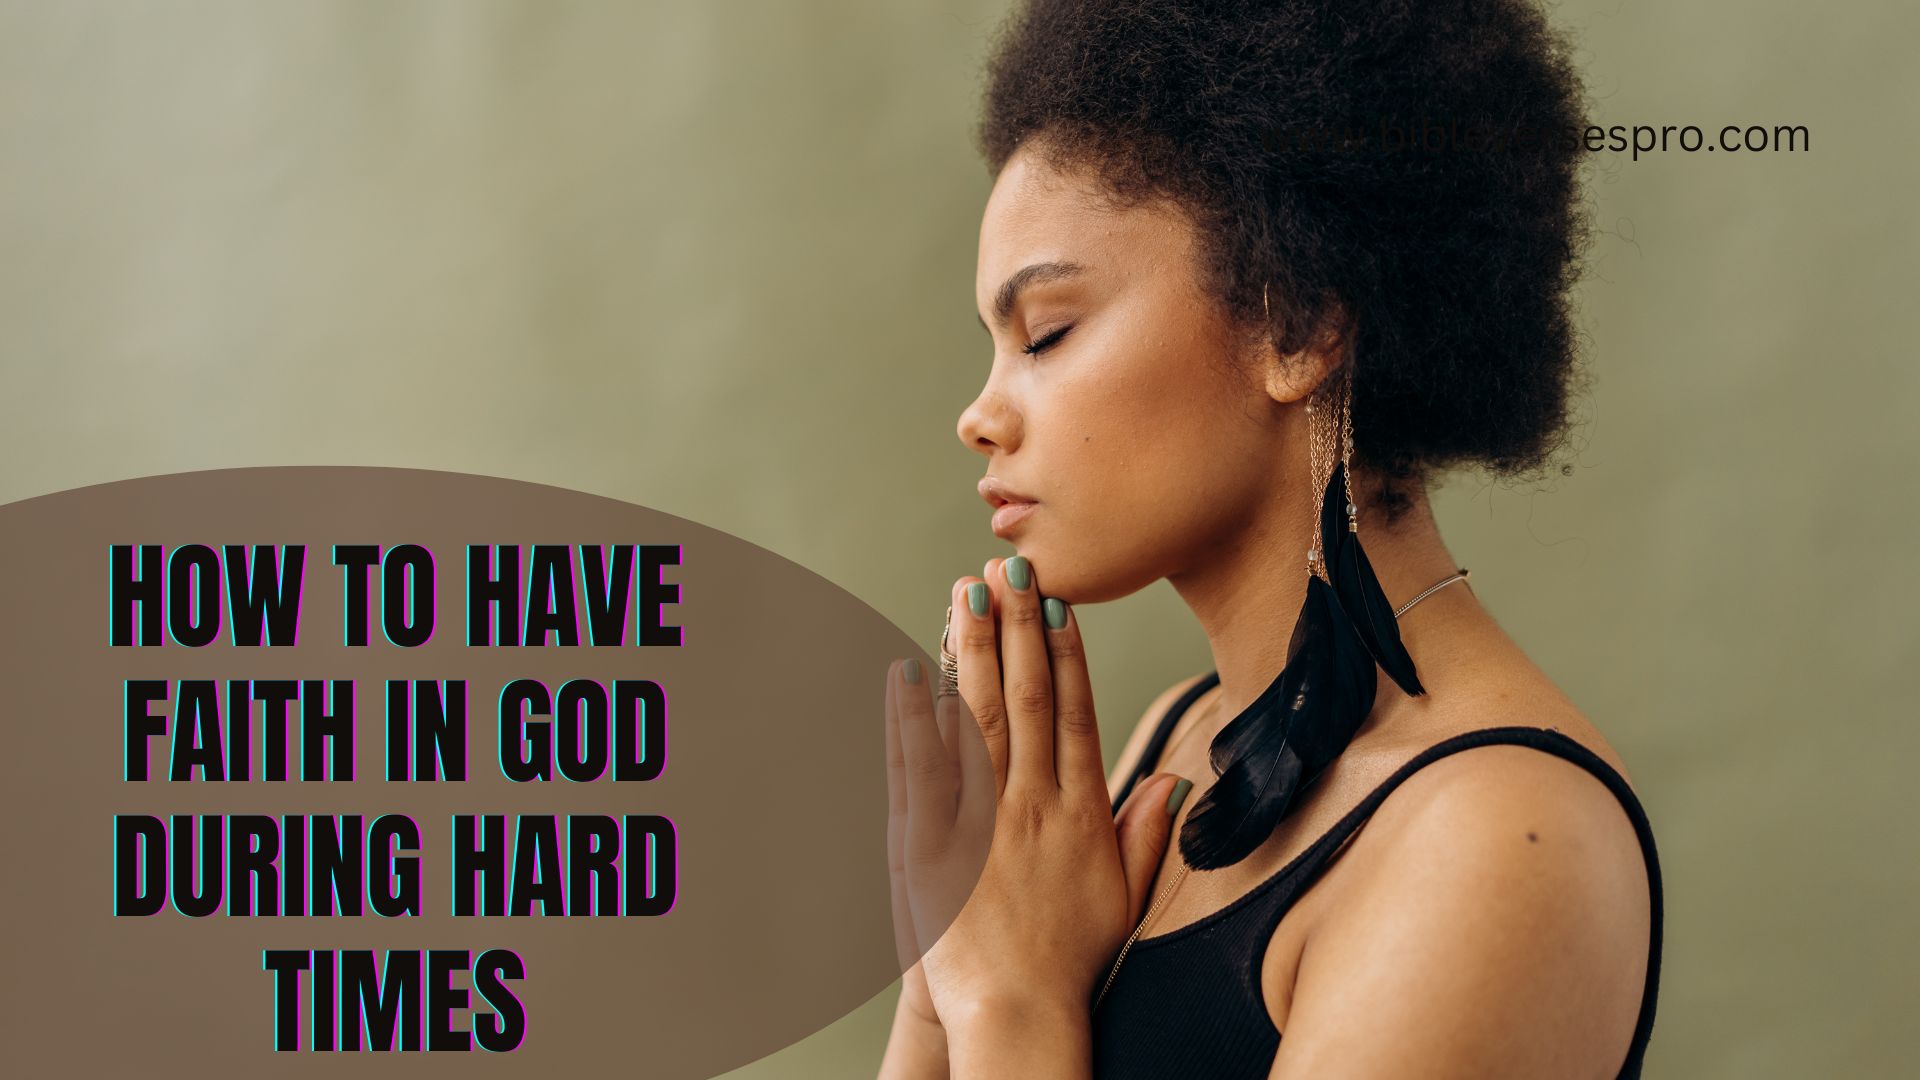 How To Have Faith In God During Hard Times